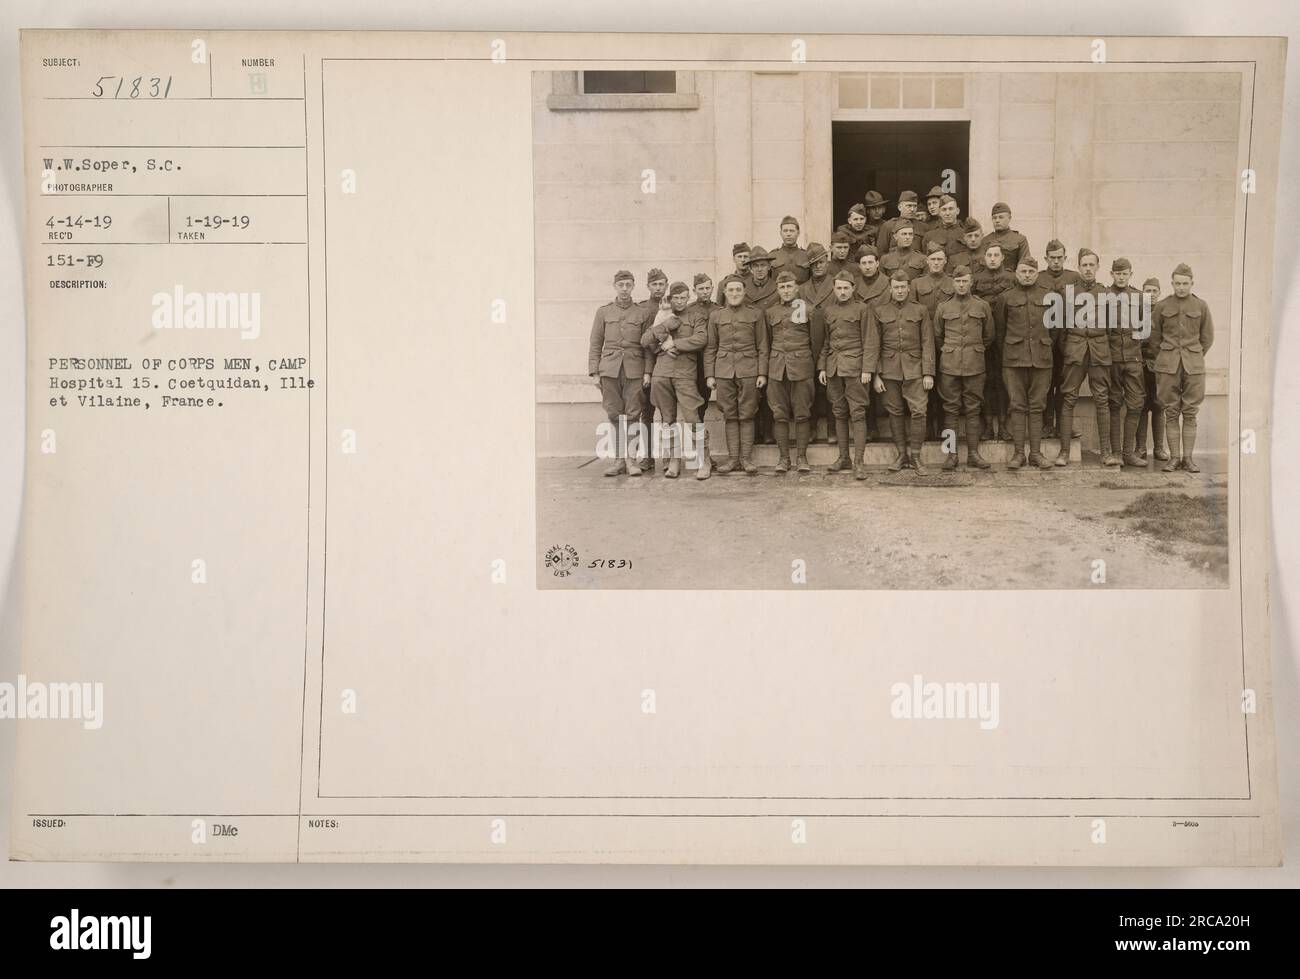 Personnel of Corps Men at Camp Hospital 15 in Coatquidan, Ille et Vilaine, France. Photograph taken by W.W. Soper on April 14, 1919. The photograph is numbered 51831 and is part of the 151-F9 collection. It was issued on January 19, 1919. Stock Photo